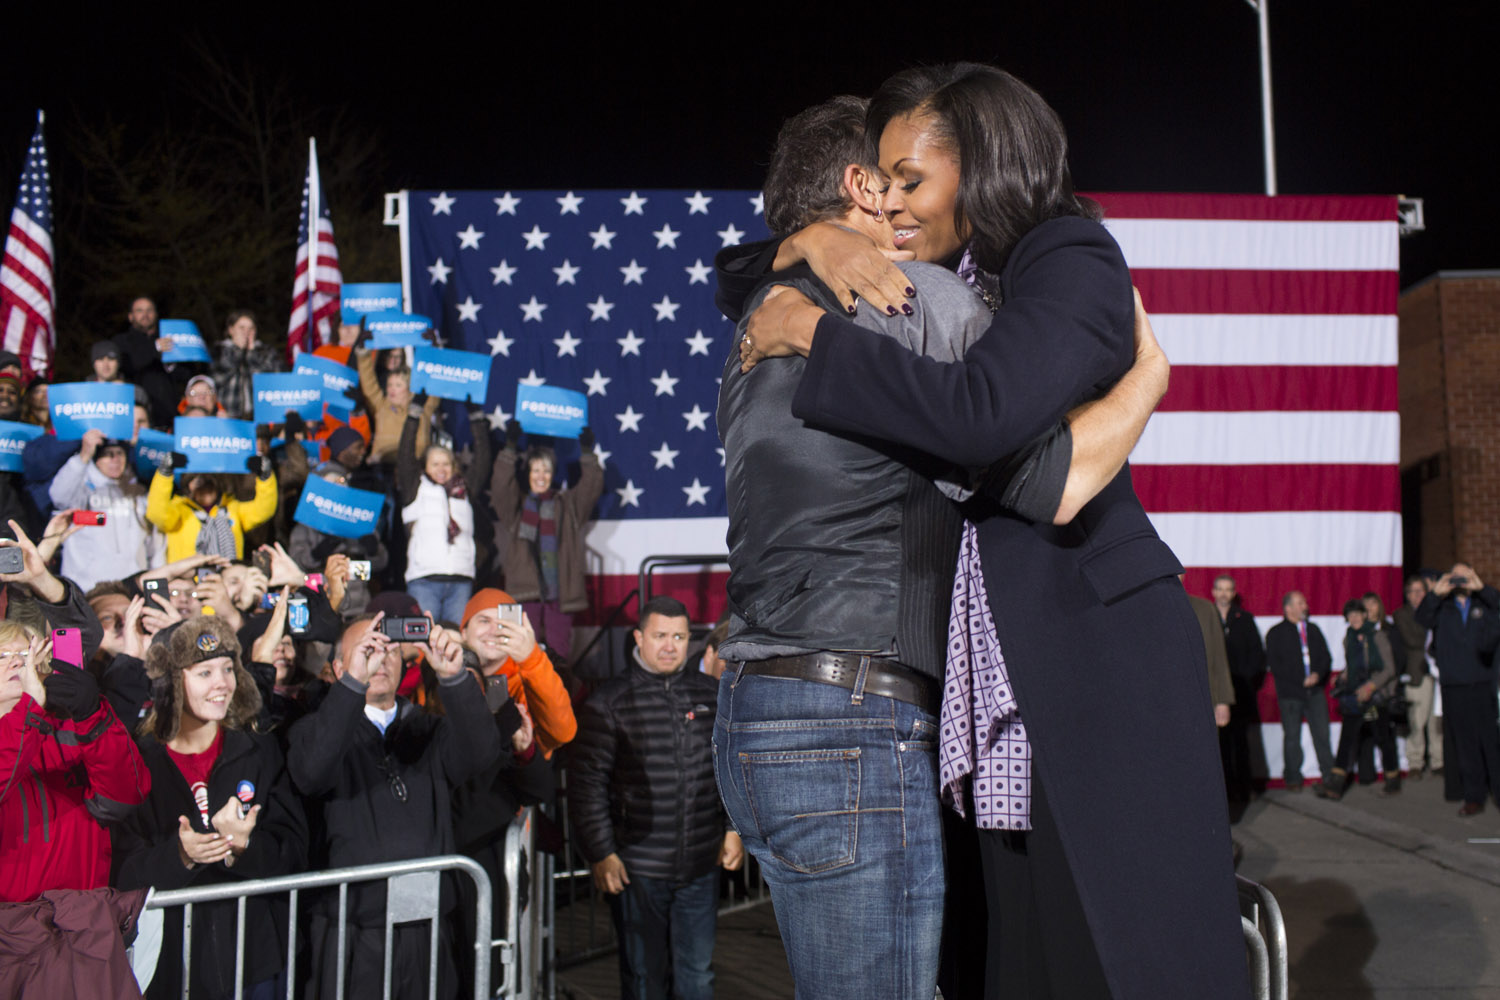 Image: Nov. 5, 2012. Musician Bruce Springsteen greets the First Lady after performing in Des Moines, Iowa.